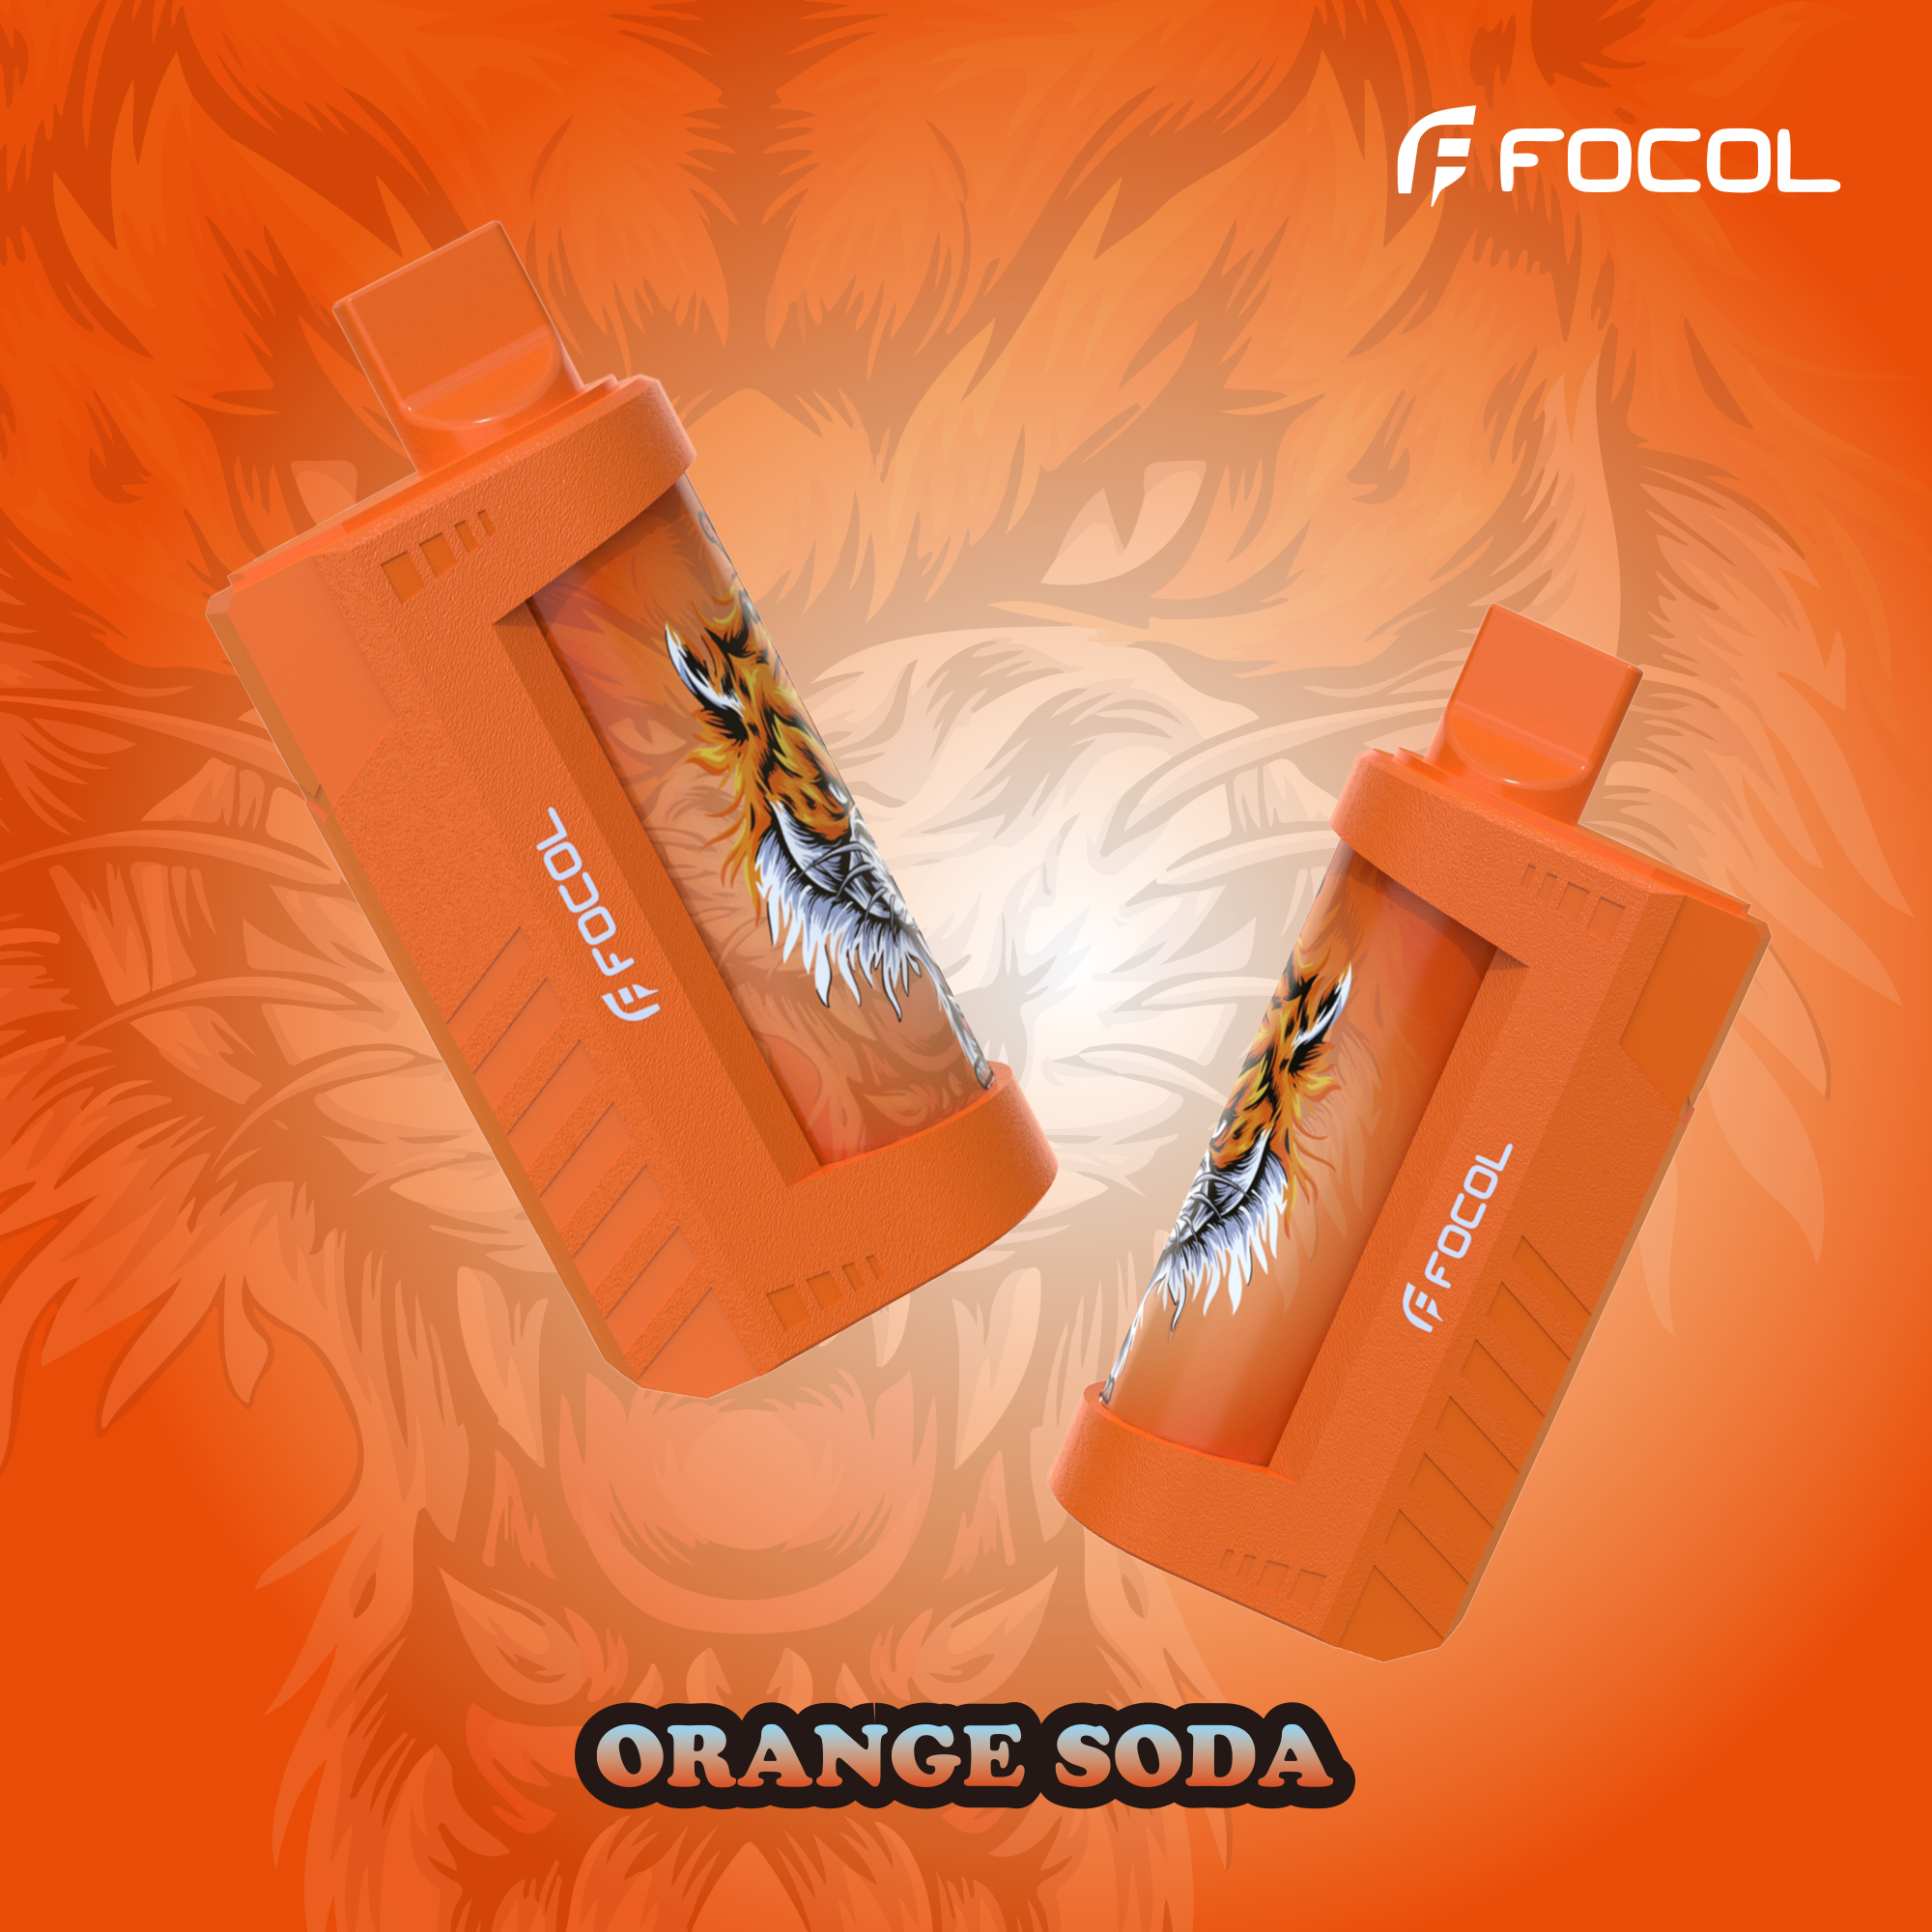 Focol Official Site Best Nicotine Disposable Vape Brand